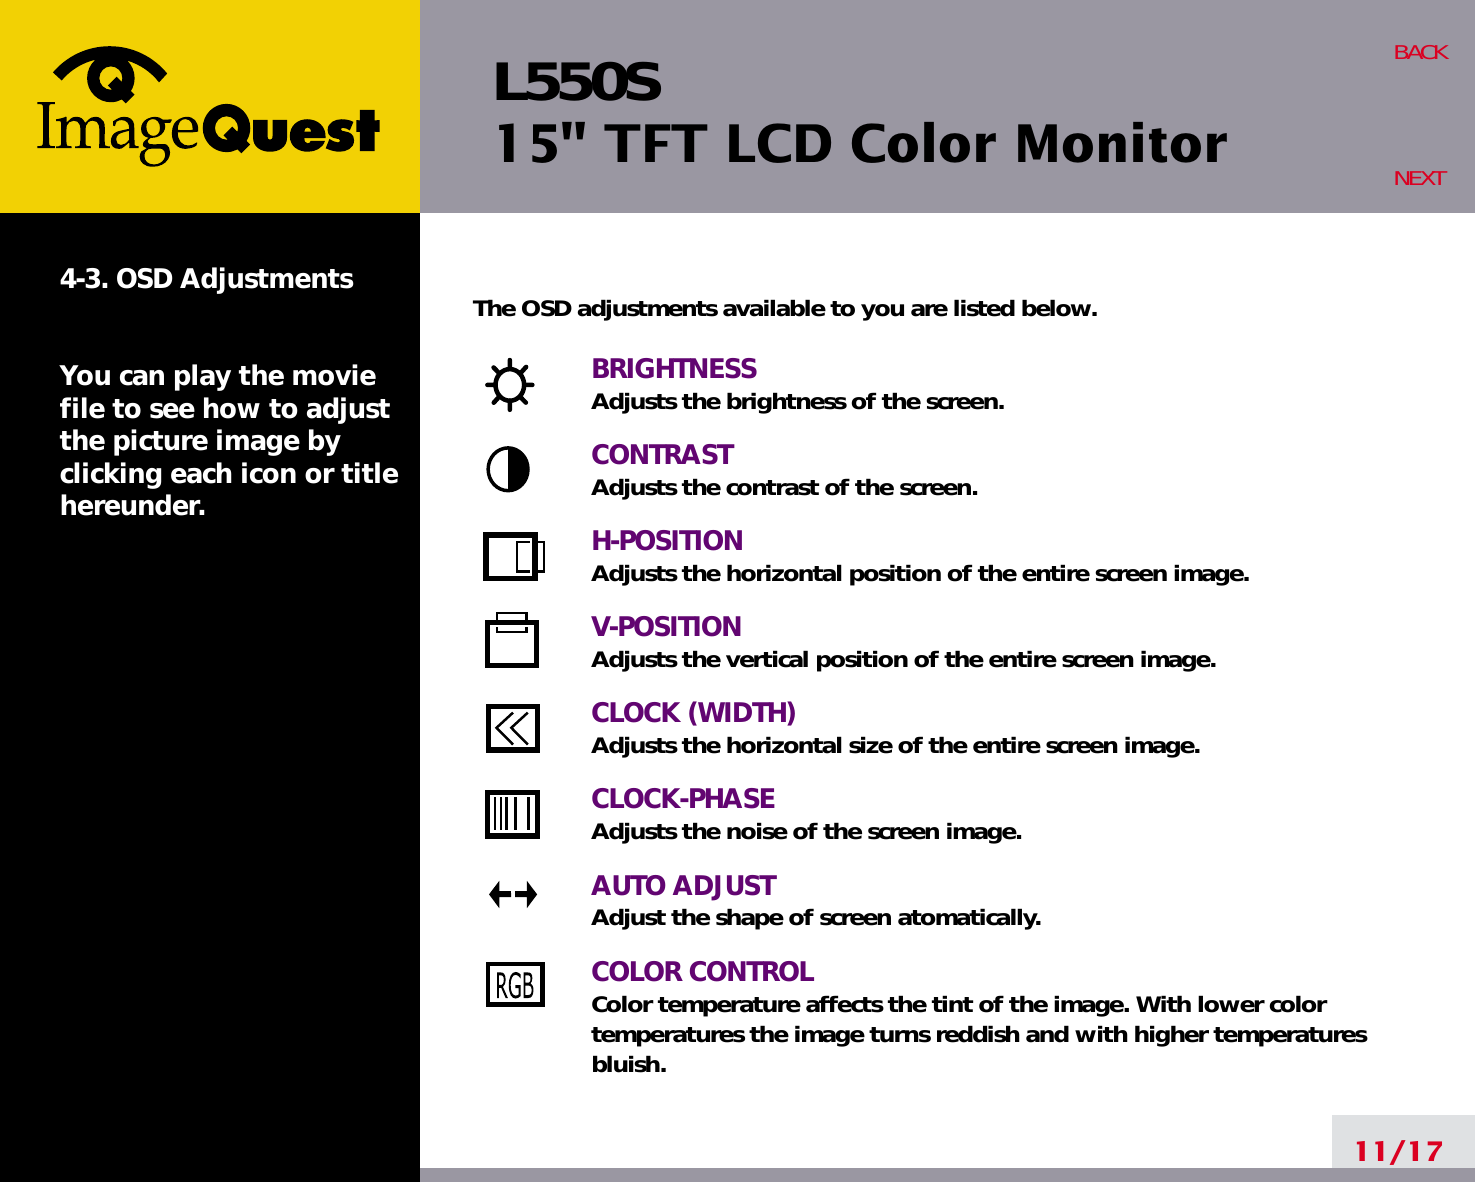 L550S15&quot; TFT LCD Color Monitor11/17BACKNEXT4-3. OSD AdjustmentsYou can play the moviefile to see how to adjustthe picture image byclicking each icon or titlehereunder.The OSD adjustments available to you are listed below.BRIGHTNESSAdjusts the brightness of the screen.CONTRASTAdjusts the contrast of the screen.H-POSITIONAdjusts the horizontal position of the entire screen image.V-POSITIONAdjusts the vertical position of the entire screen image.CLOCK (WIDTH)Adjusts the horizontal size of the entire screen image.CLOCK-PHASEAdjusts the noise of the screen image.AUTO ADJUSTAdjust the shape of screen atomatically.COLOR CONTROLColor temperature affects the tint of the image. With lower color temperatures the image turns reddish and with higher temperatures bluish.